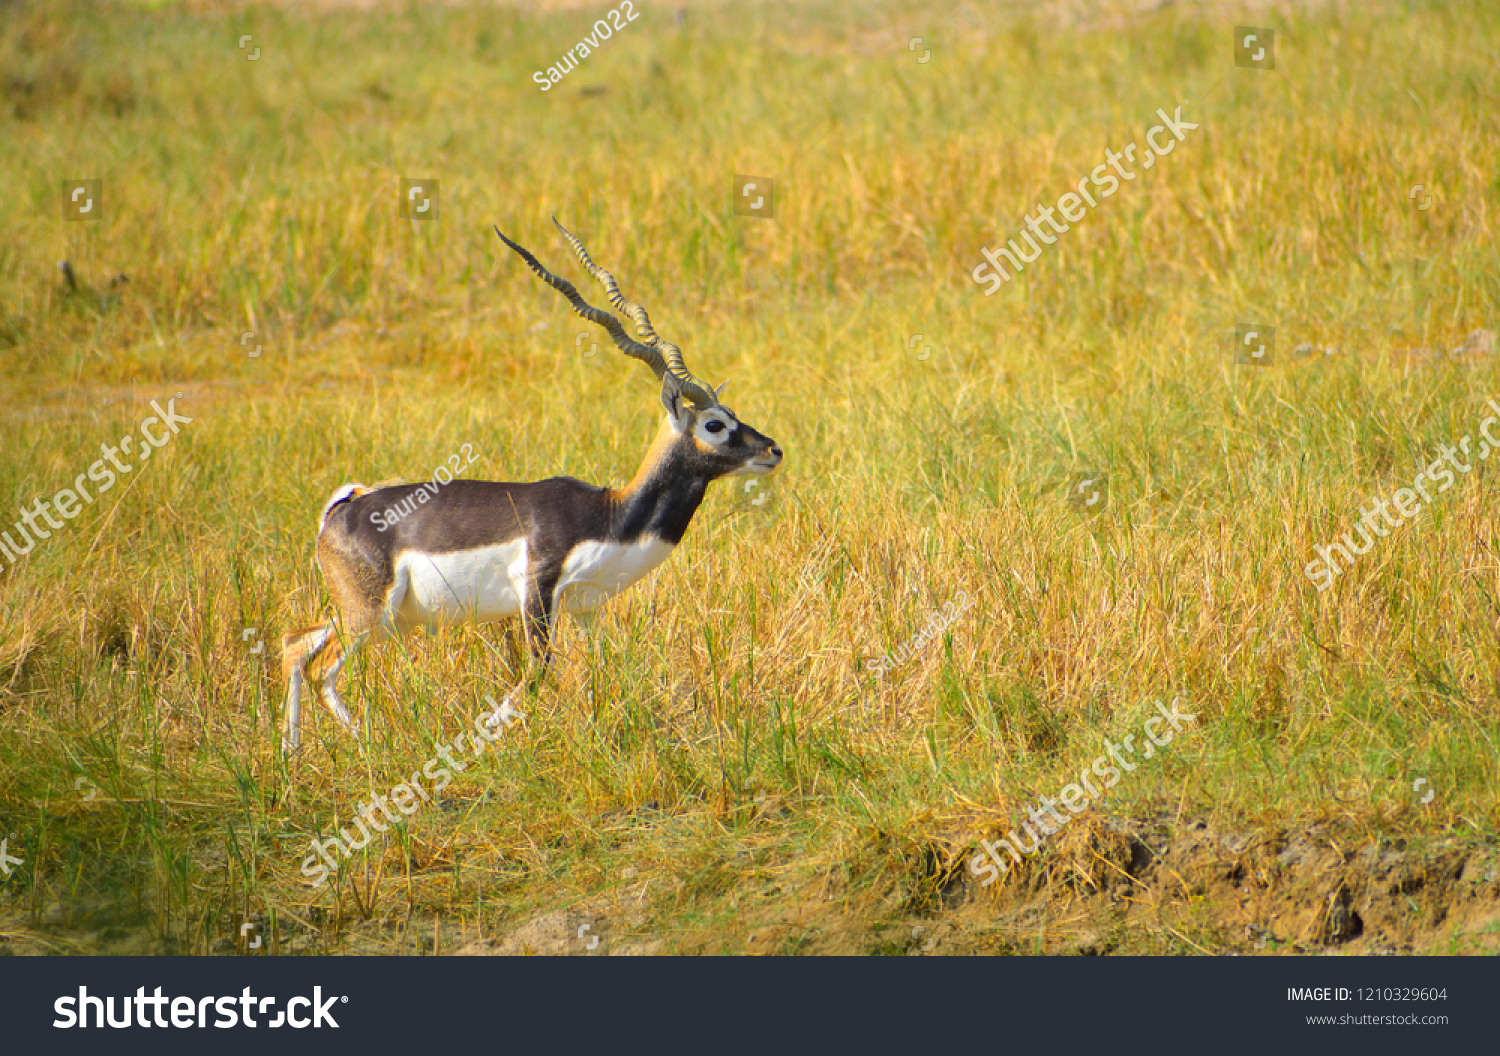 The blackbuck or Indian antelope in the forest. #1210329604